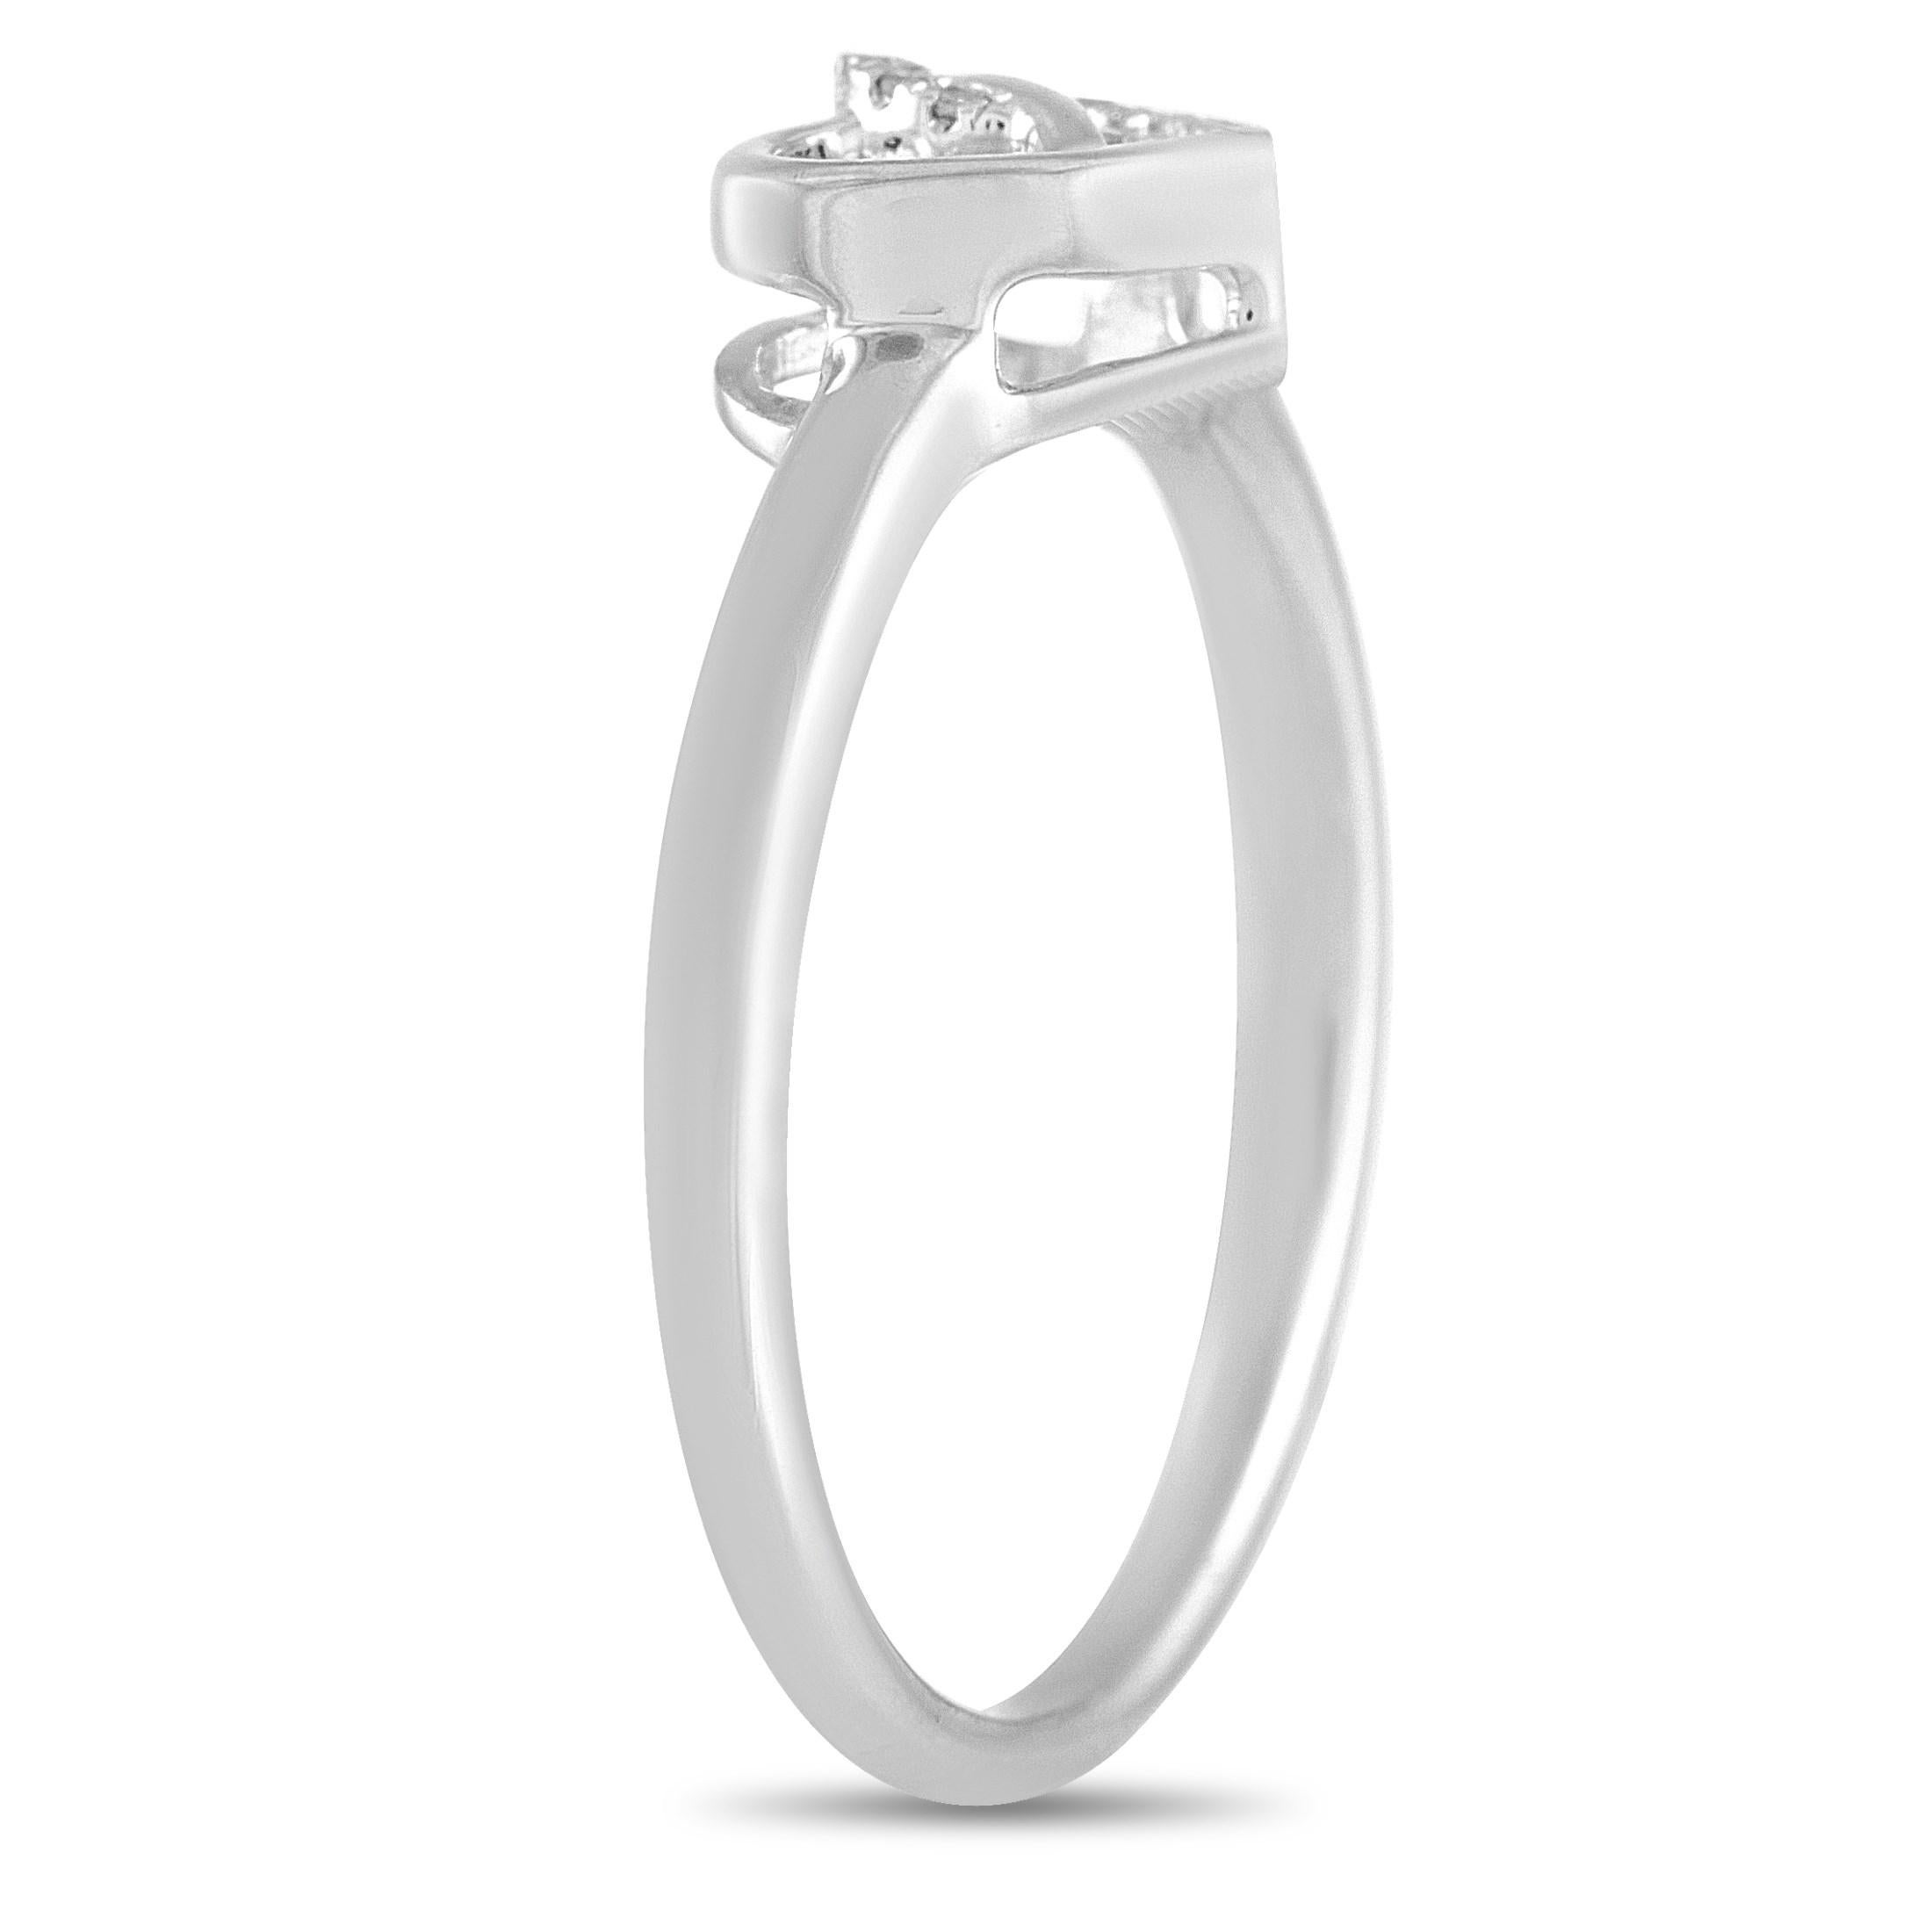 This LB Exclusive 14K White Gold 0.05 ct Diamond Intertwined Heart Ring is made with 14K White gold and features a heart shape set with 0.05 carats of round-cut diamonds around half of the heart. The ring has a band thickness of 2 mm, a top height